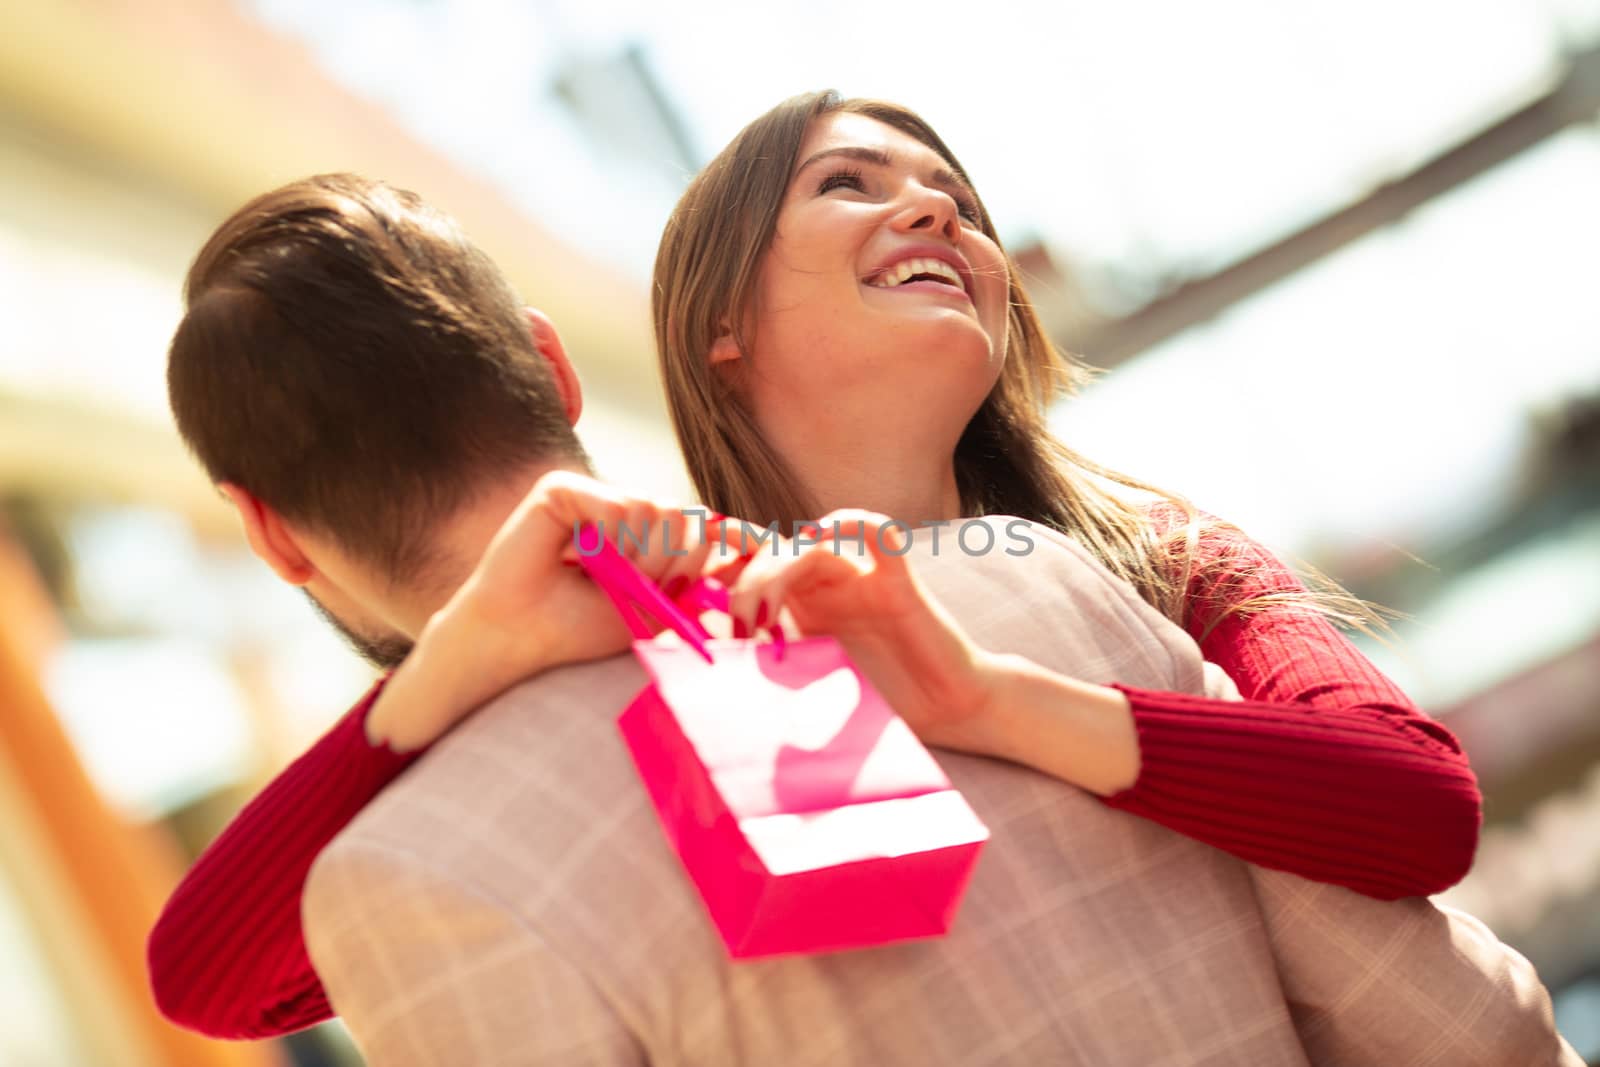 Smiling couple embracing at shopping mall holding paper bags